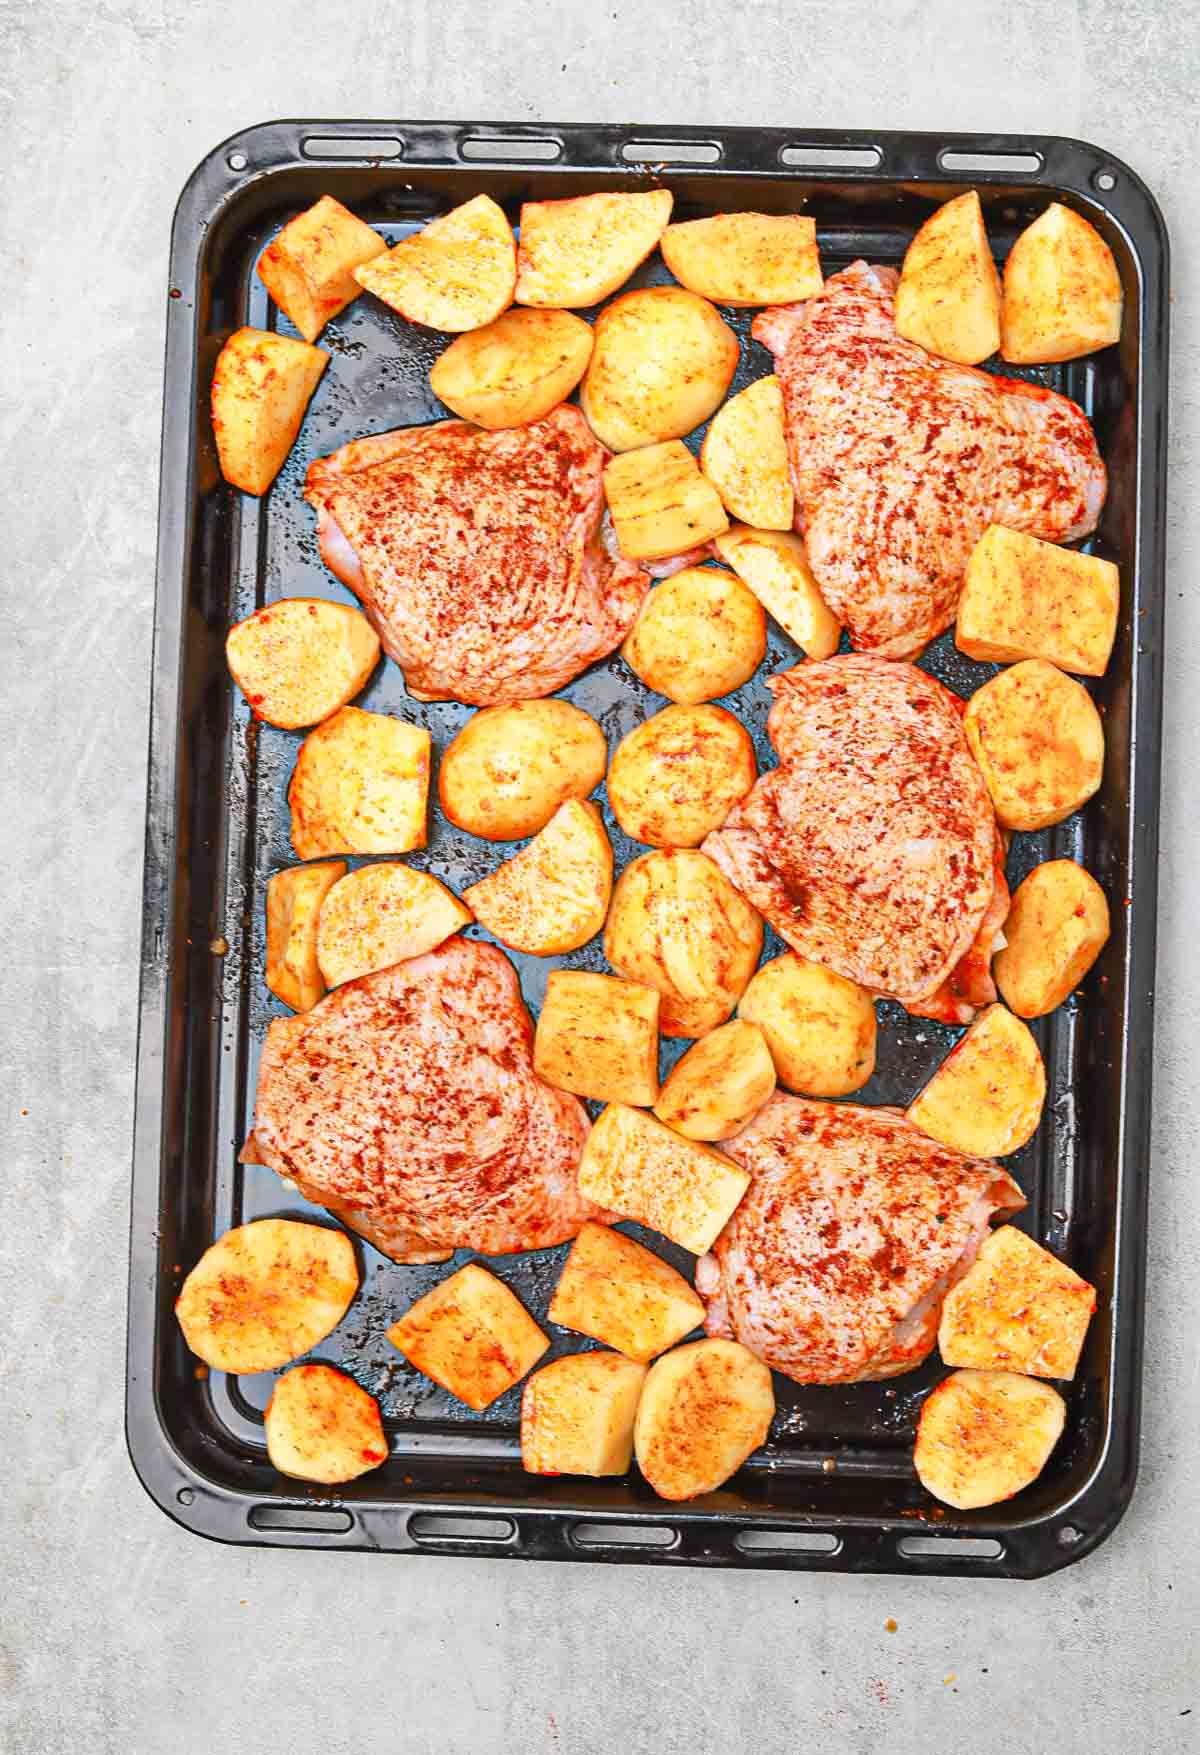 chicken and potatoes in a baking tray.